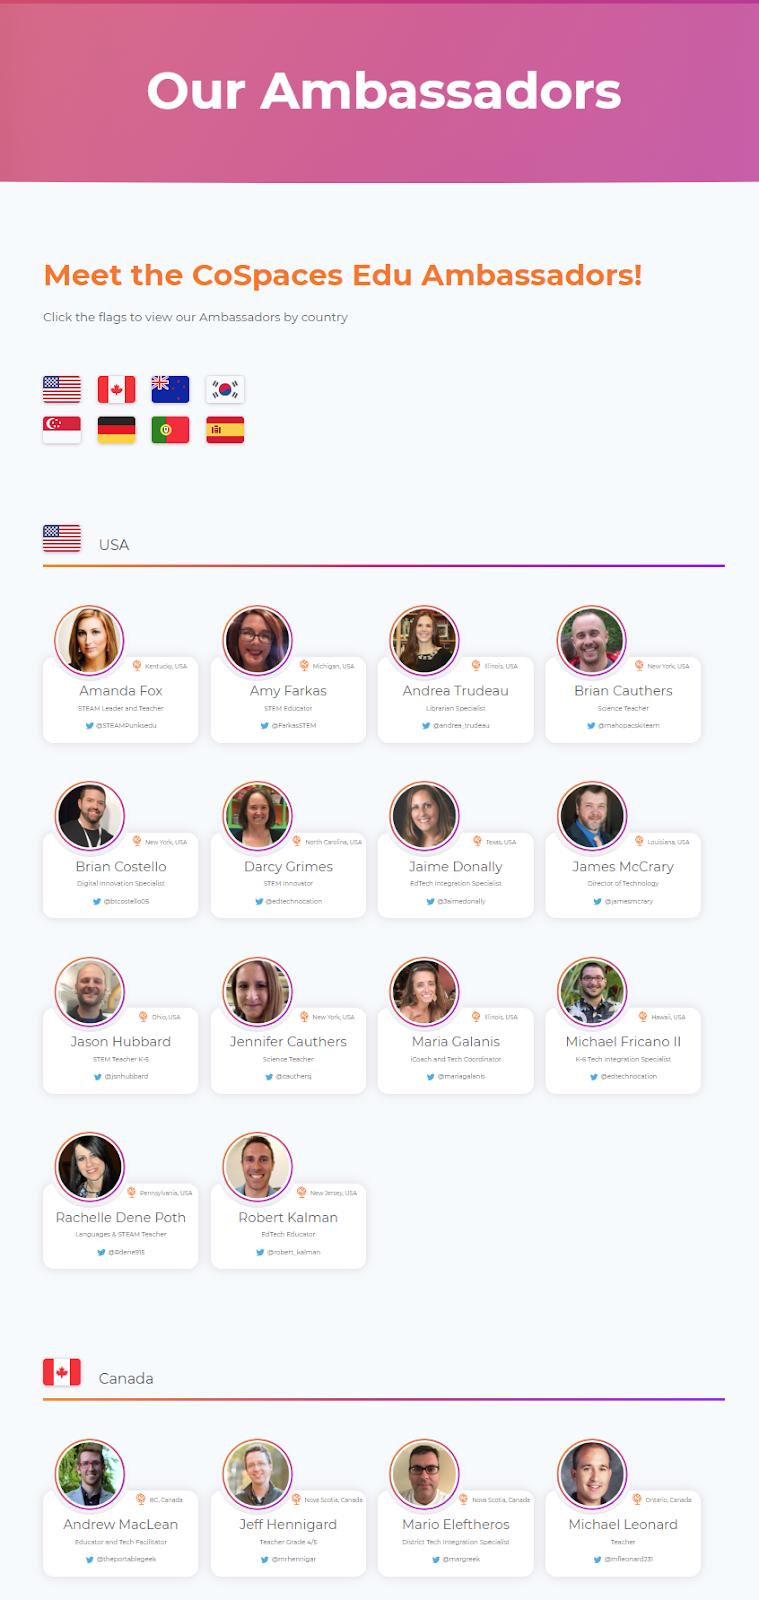 Our Ambassadors The CoSpaces Edu Ambassadors are CoSpaces Edu experts and avid supporters of the platform who have been carefully selected to represent CoSpaces Edu in the education world.